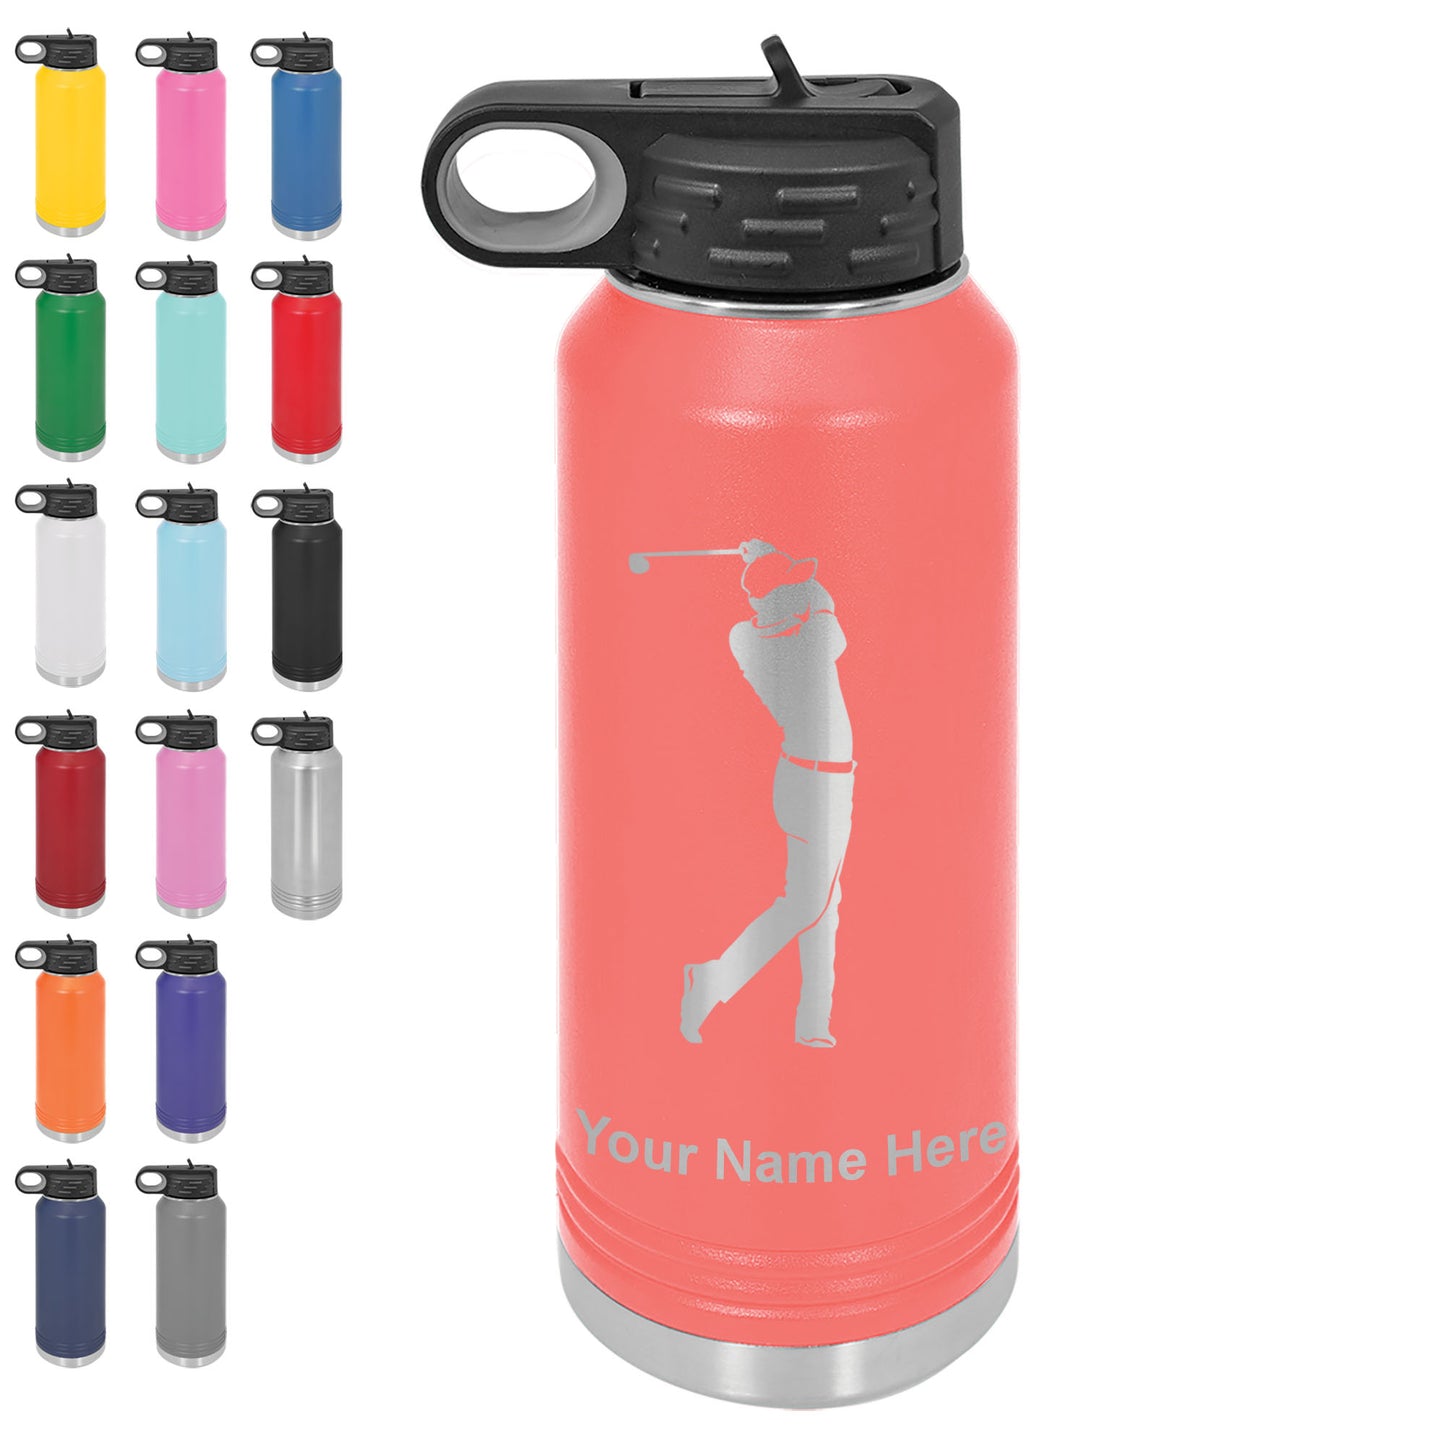 LaserGram 32oz Double Wall Flip Top Water Bottle with Straw, Golfer Golfing, Personalized Engraving Included